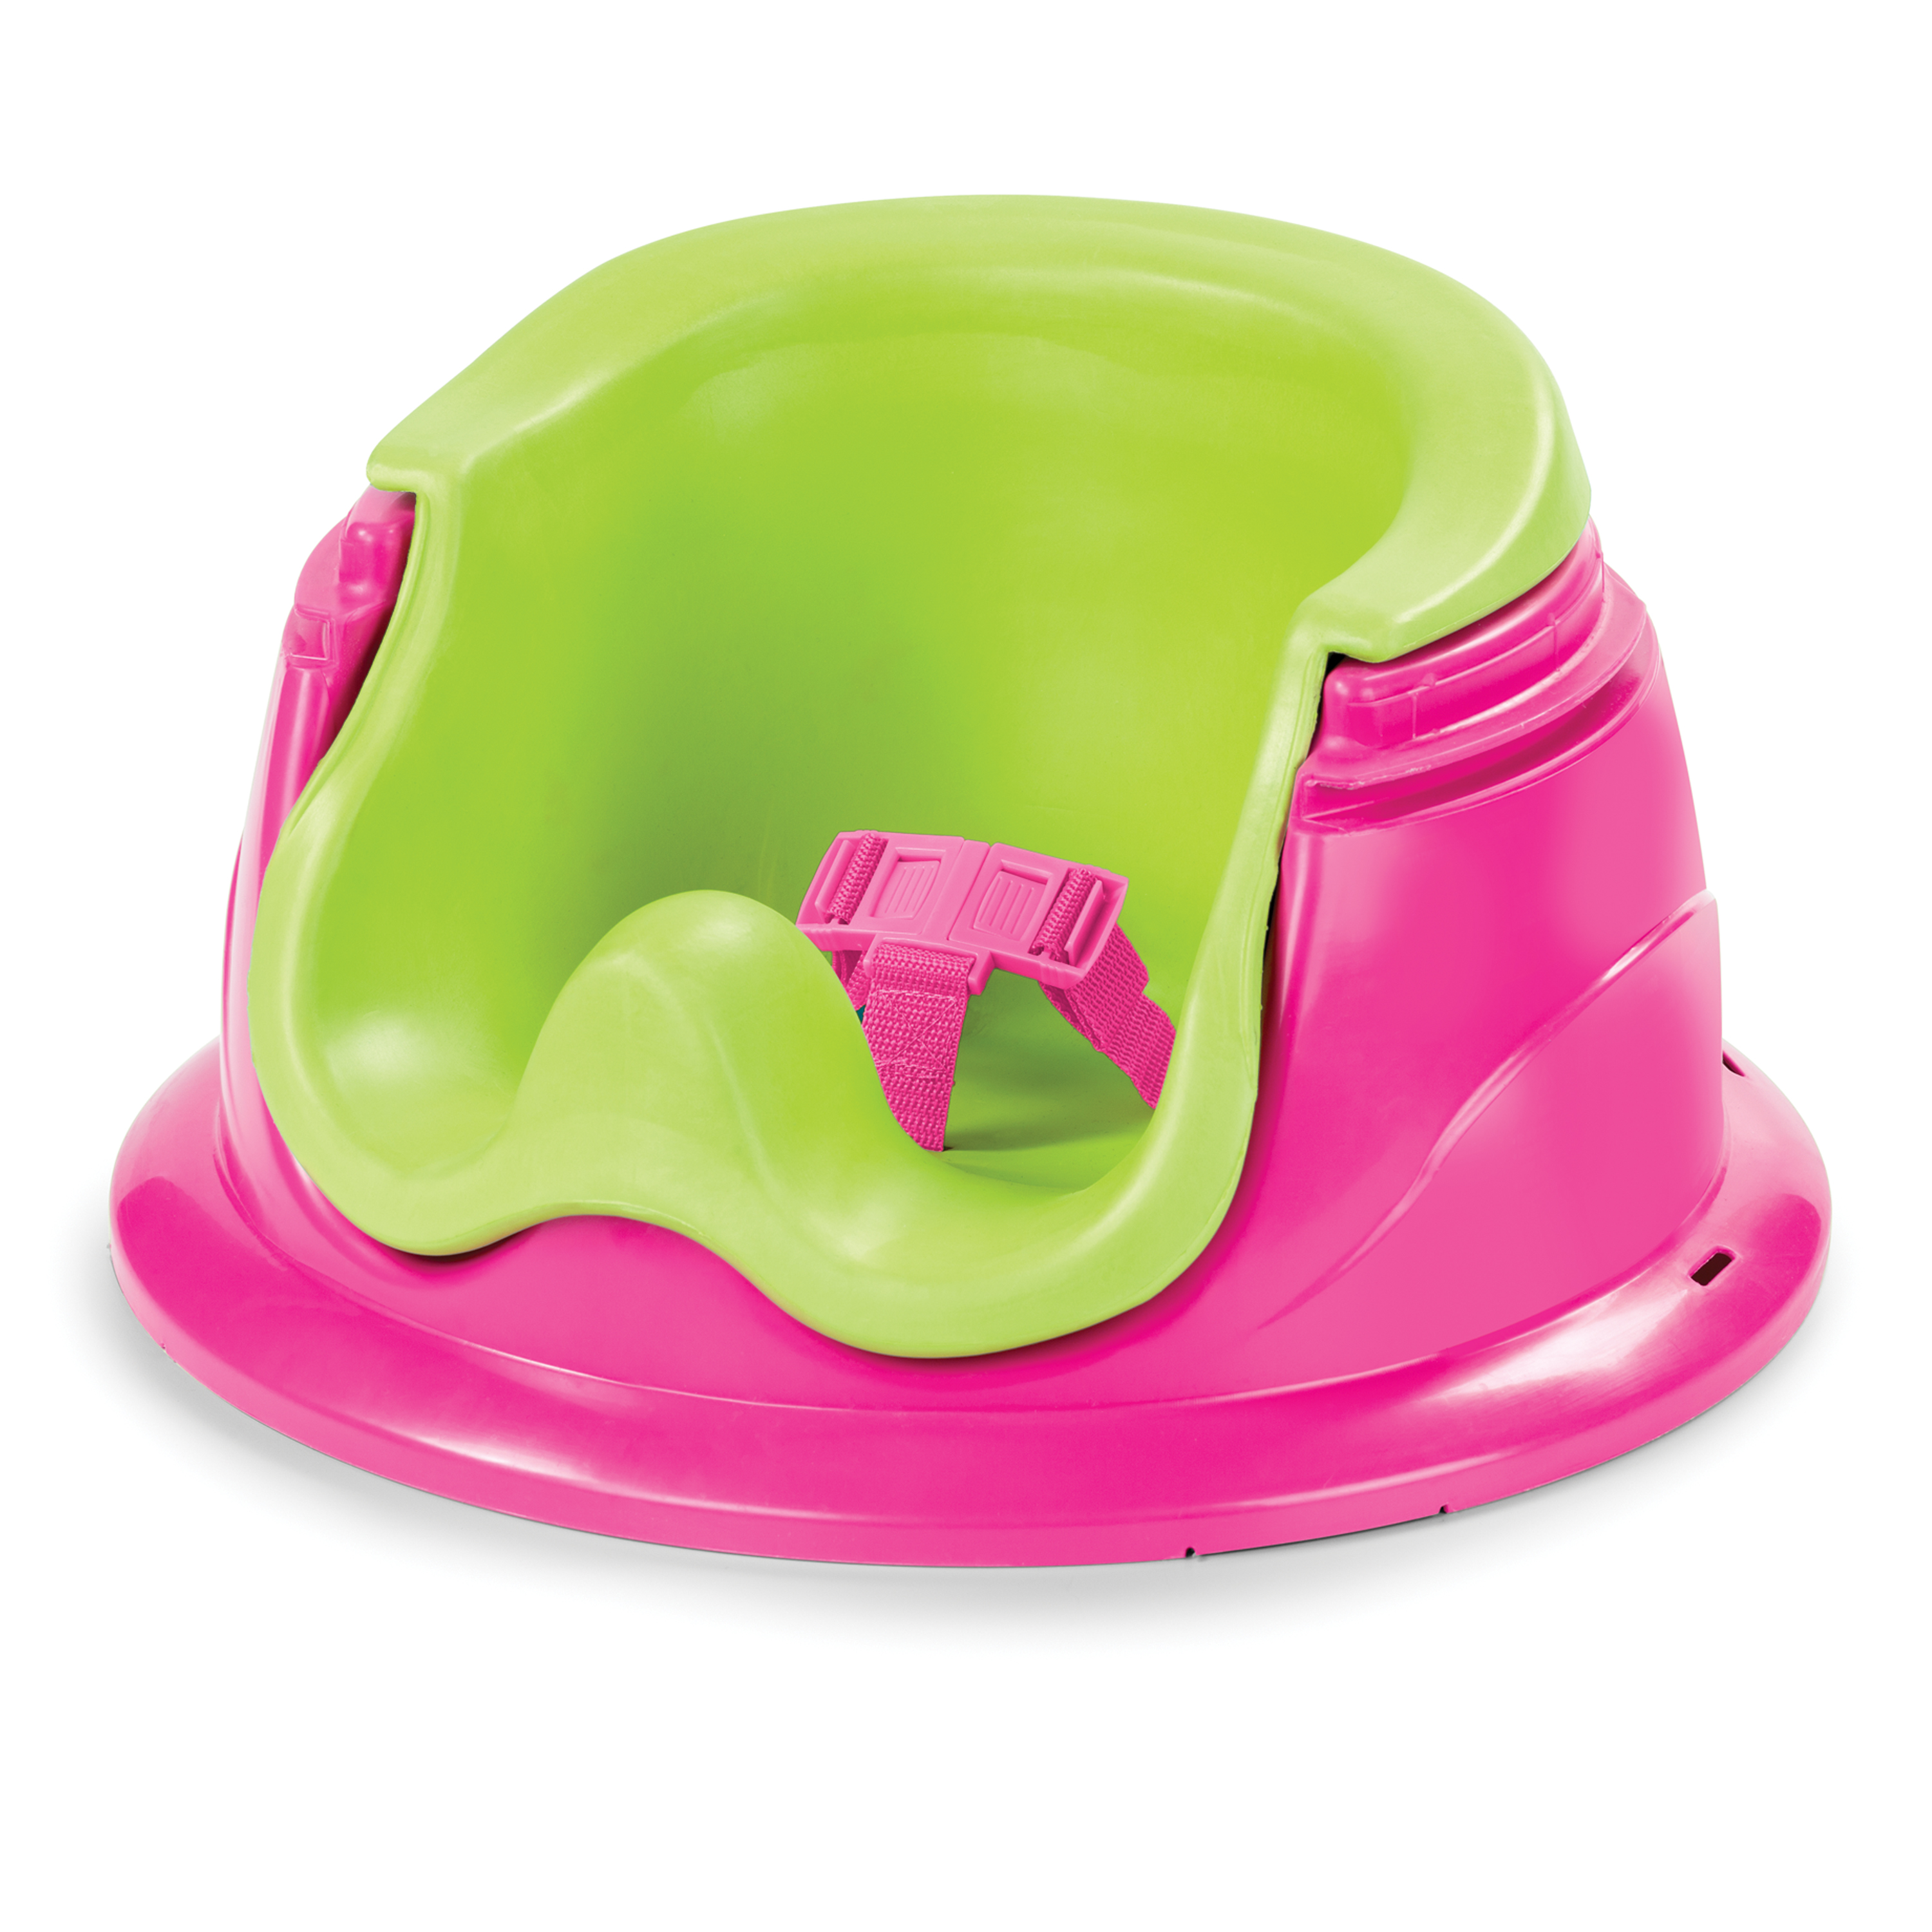 Summer Deluxe SuperSeat, Island Giggles (Pink), Unisex - image 3 of 8